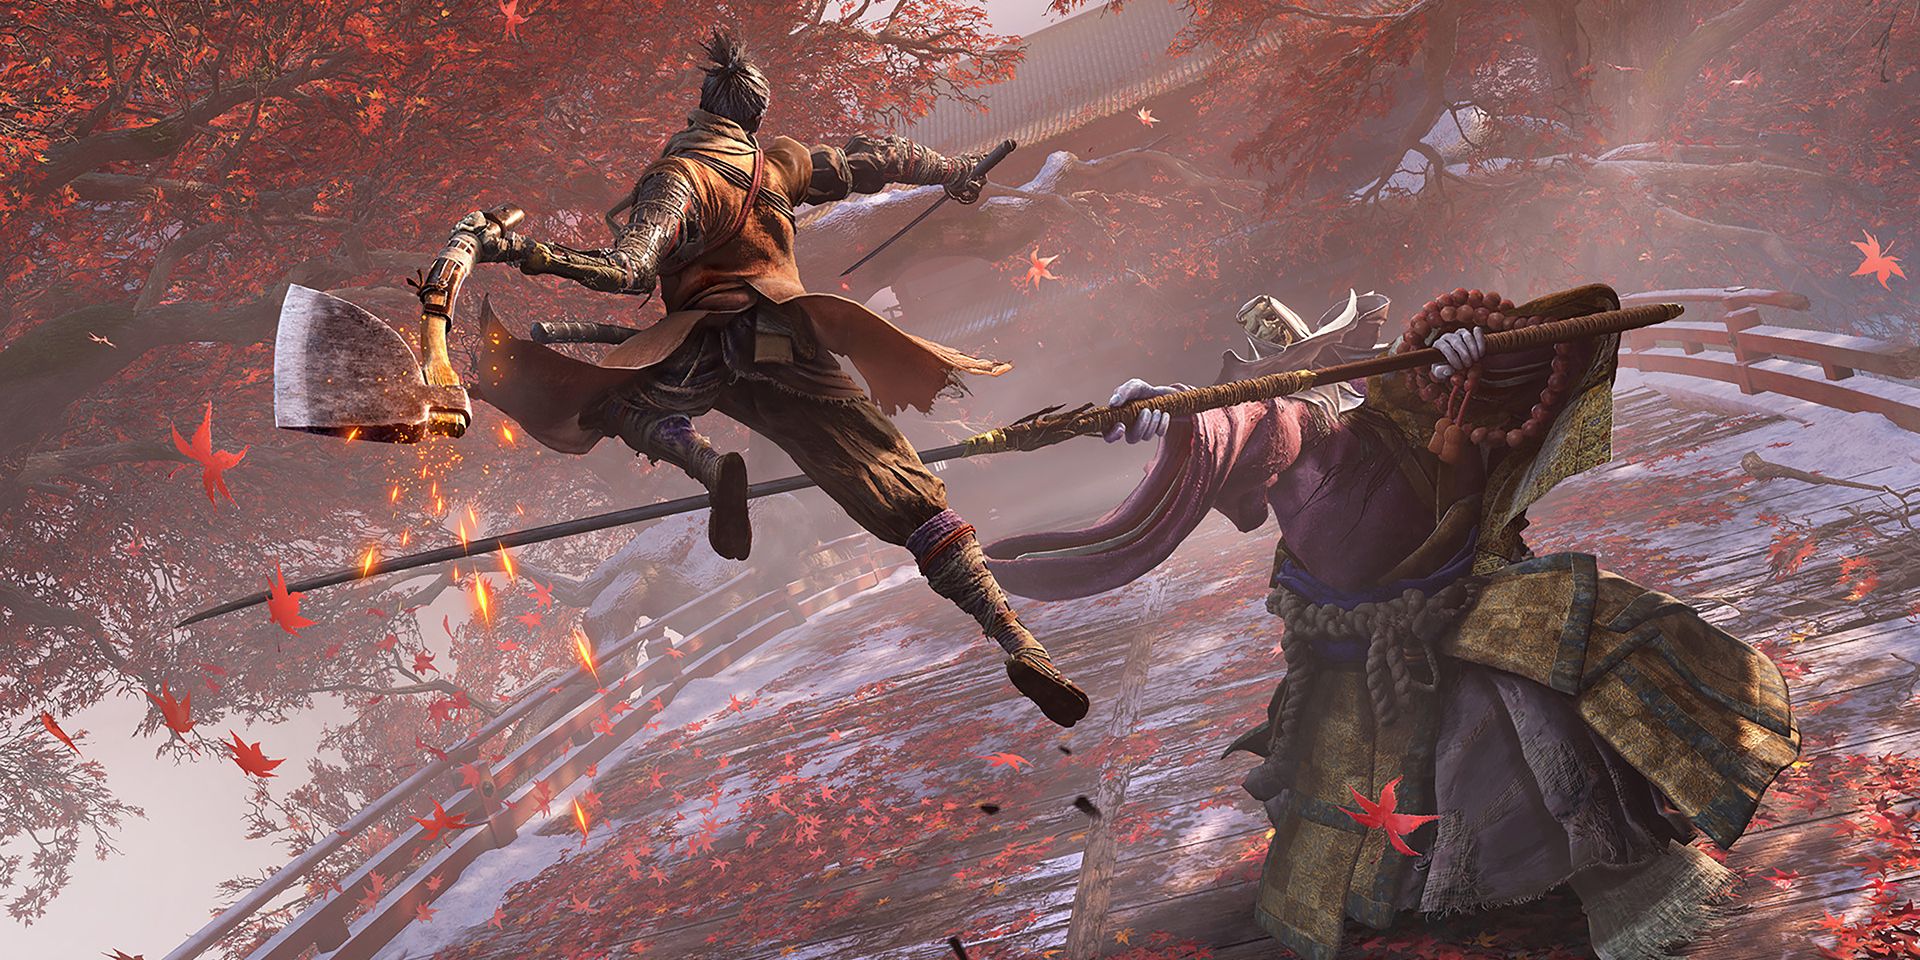 Wolf leaping to a boss with an ax in Sekiro Shadows Die Twice